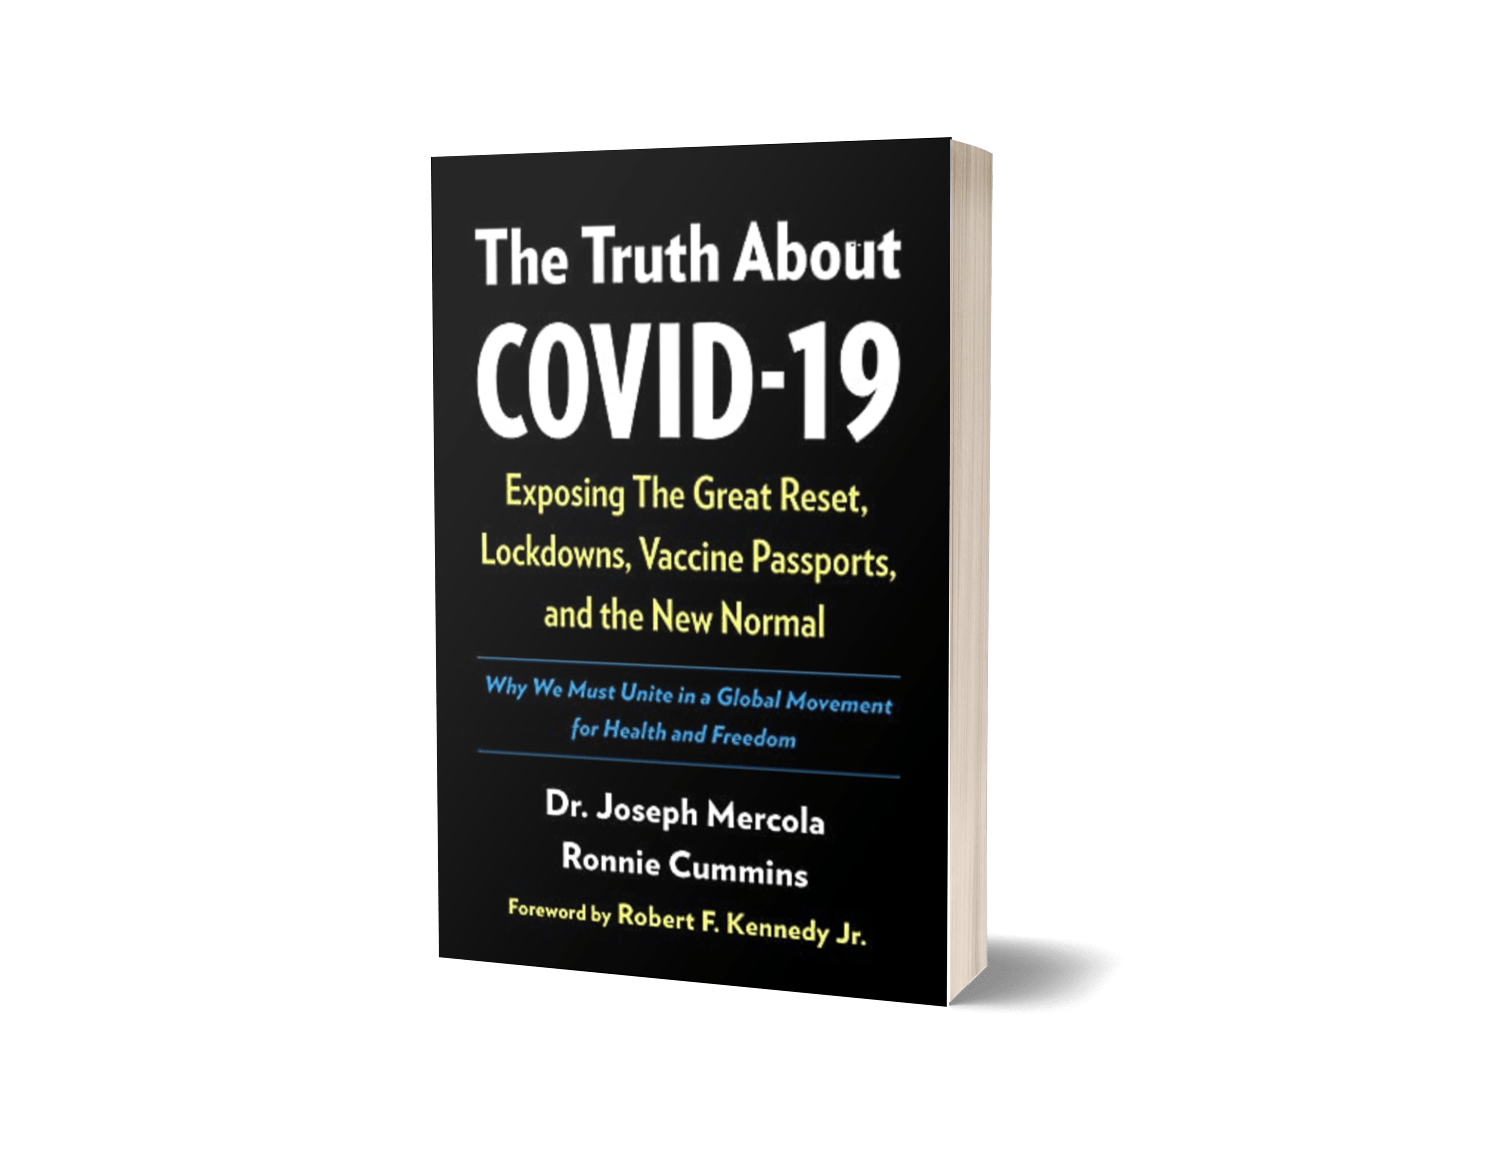 The Truth about Covid-19 by Dr. Joseph Mercola